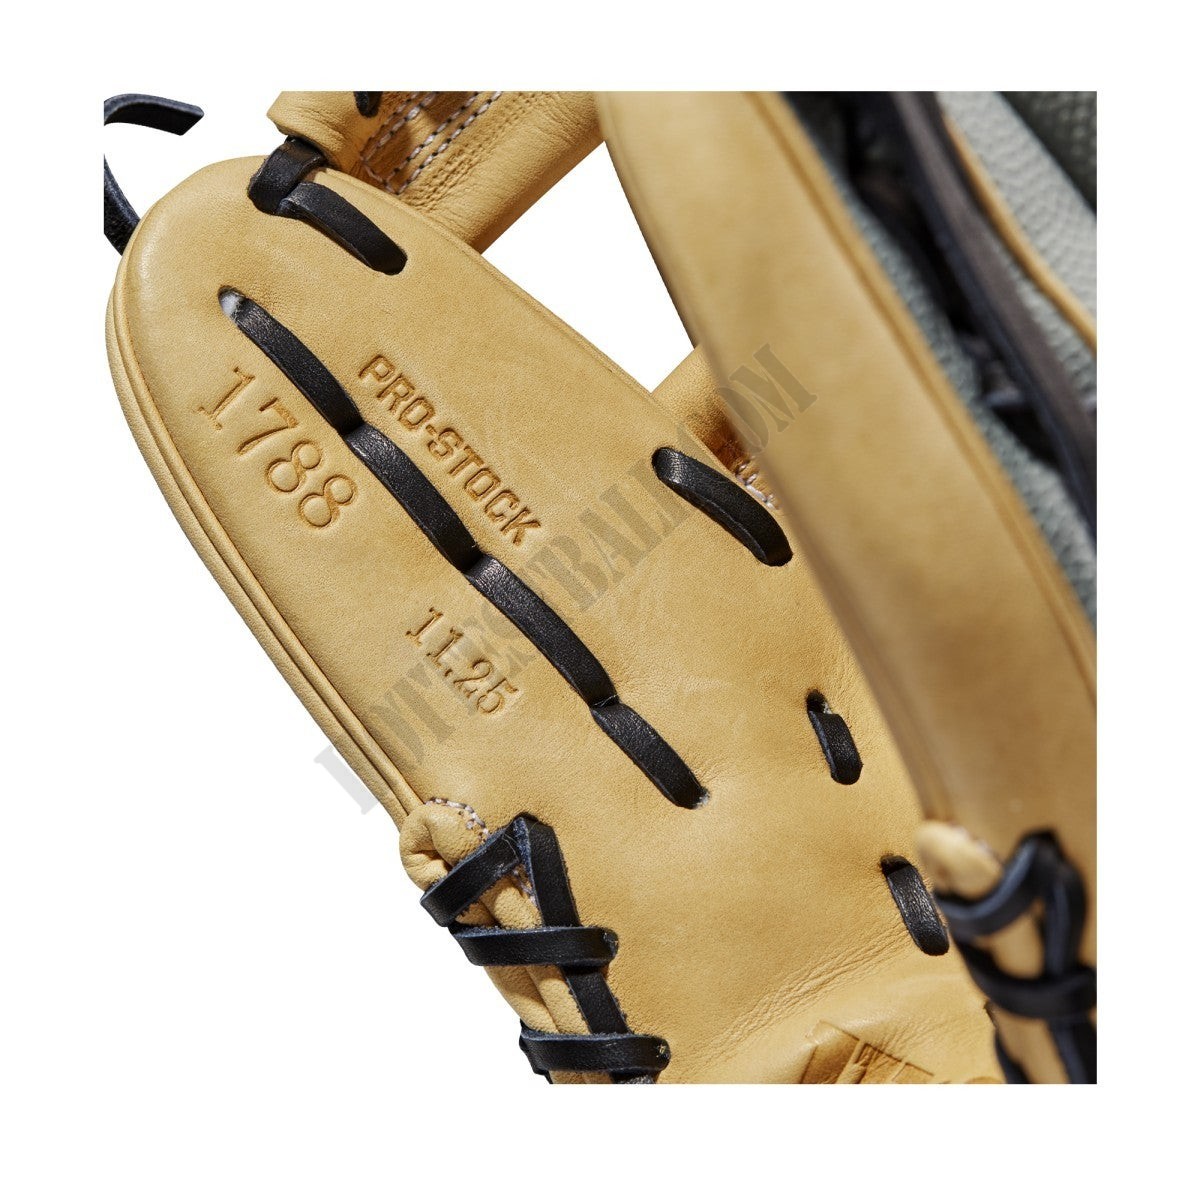 2019 A2000 1788 SuperSkin 11.25" Infield Baseball Glove - Right Hand Throw ● Wilson Promotions - -7